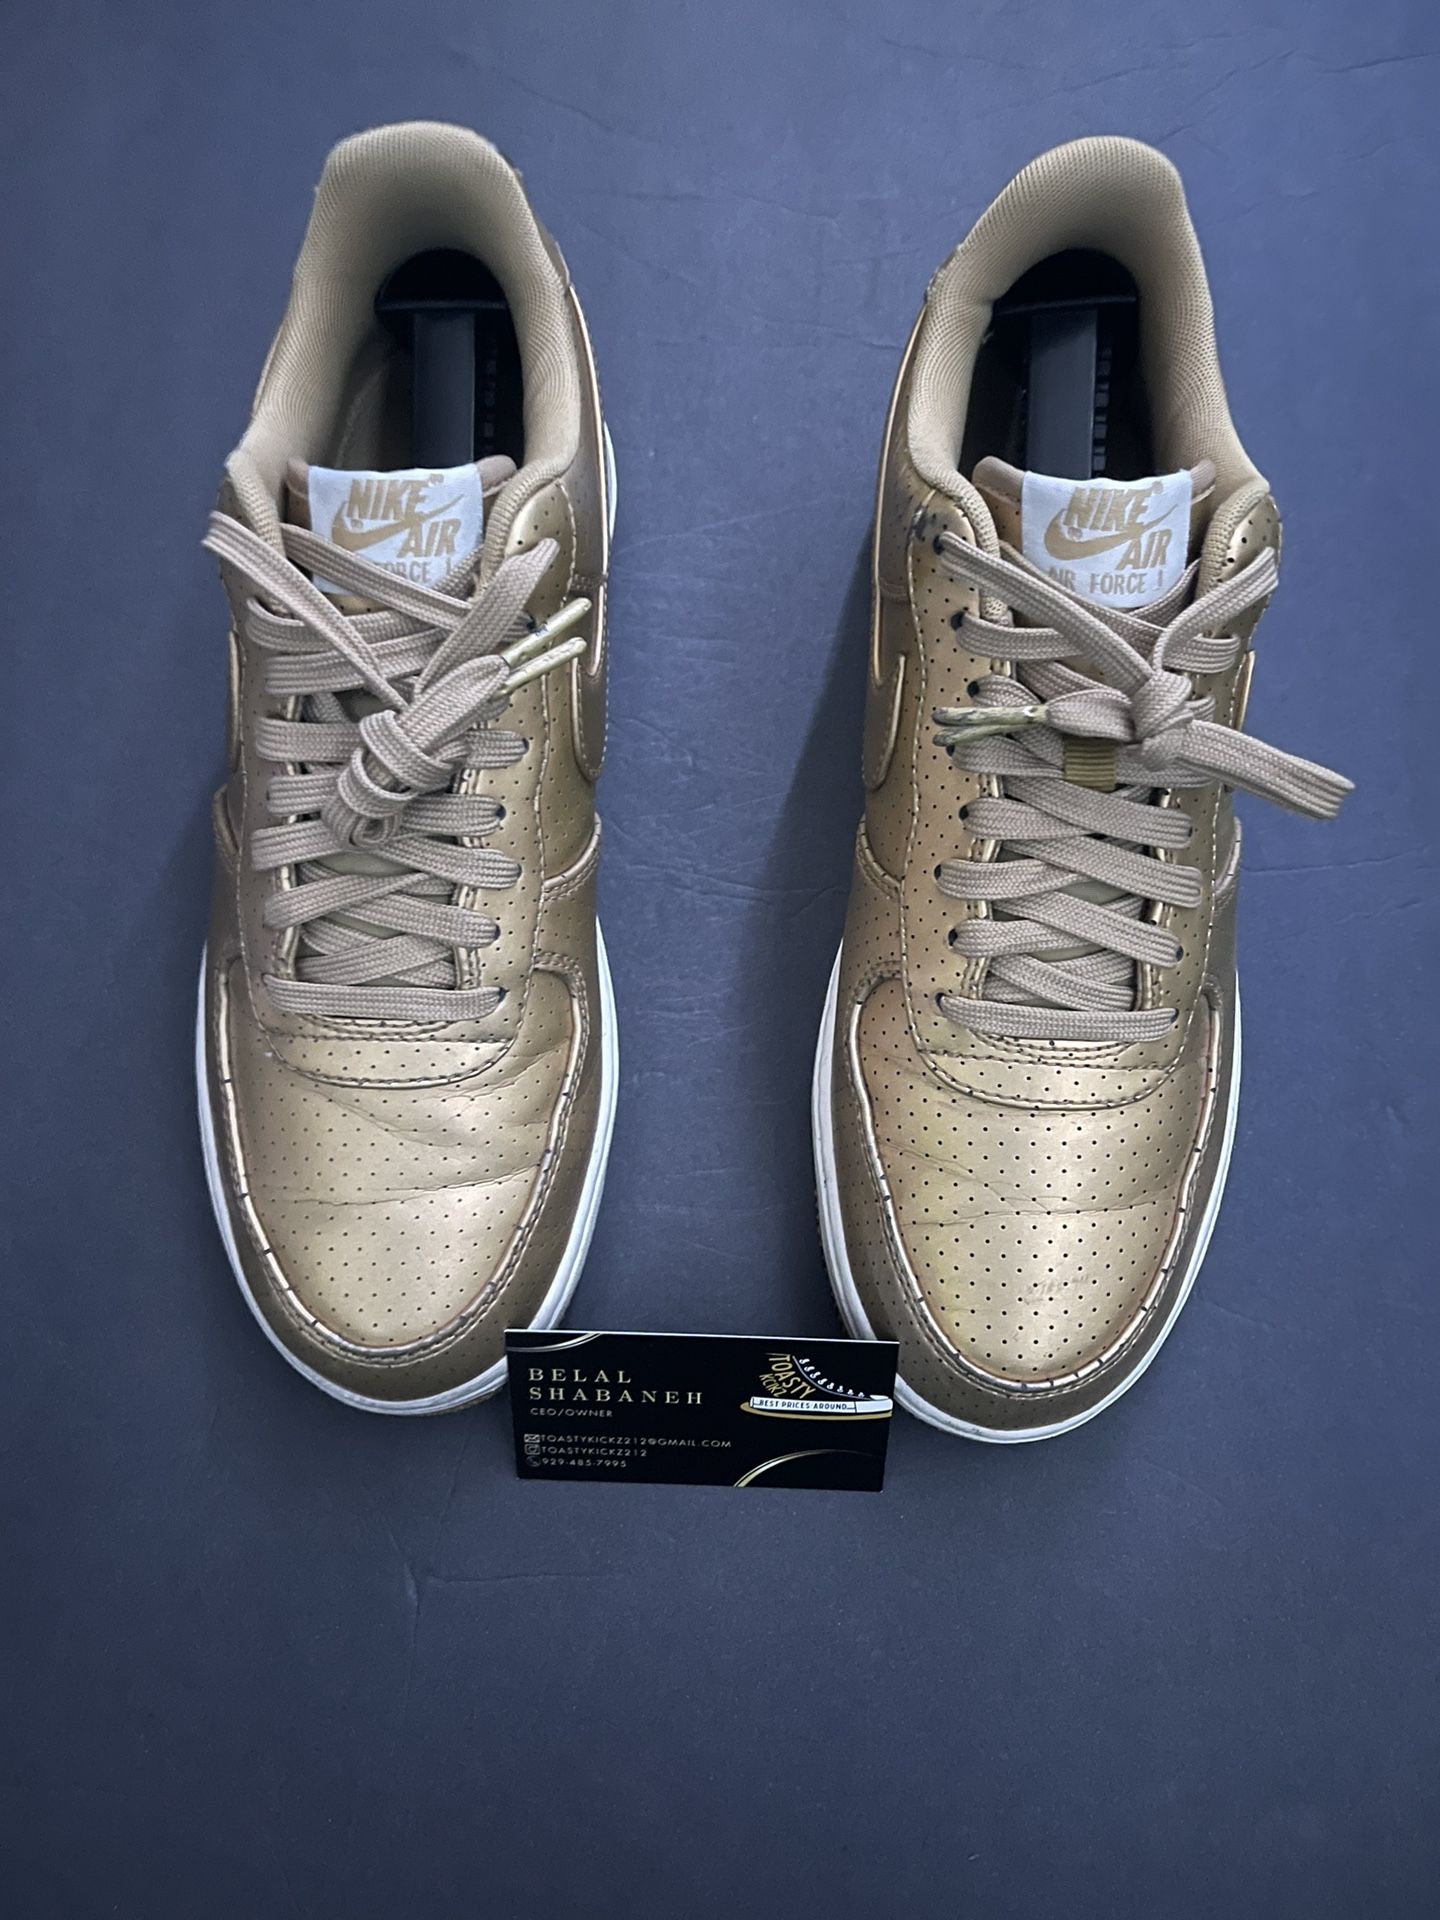 Metallic Gold Air Force 1s Proof Of Authenticity Available 